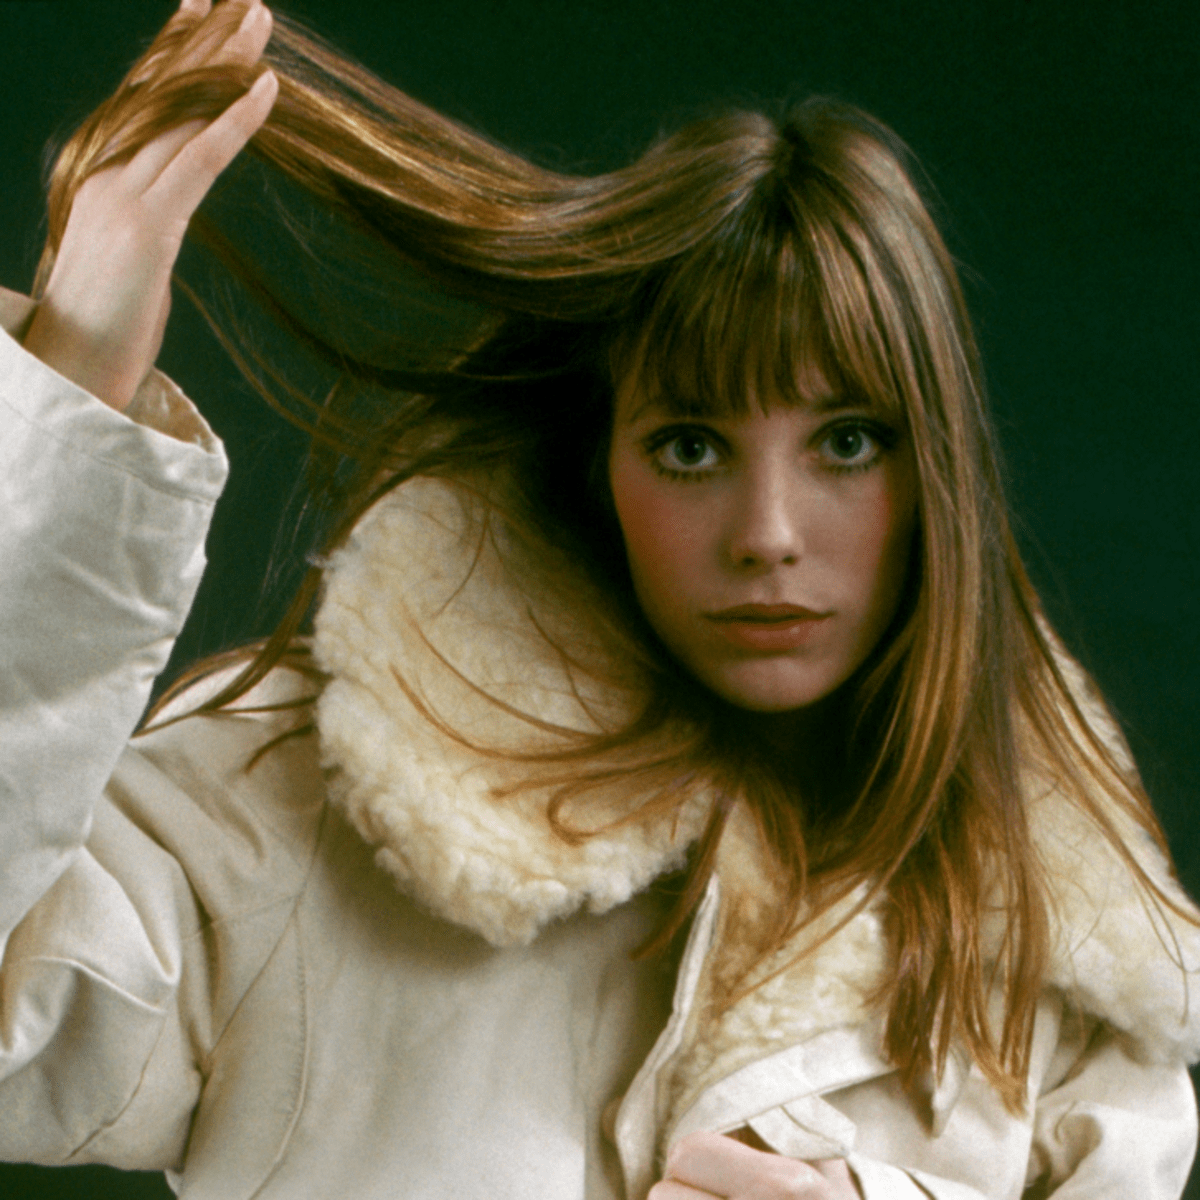 Remembering Jane Birkin: How the French icon served as inspiration